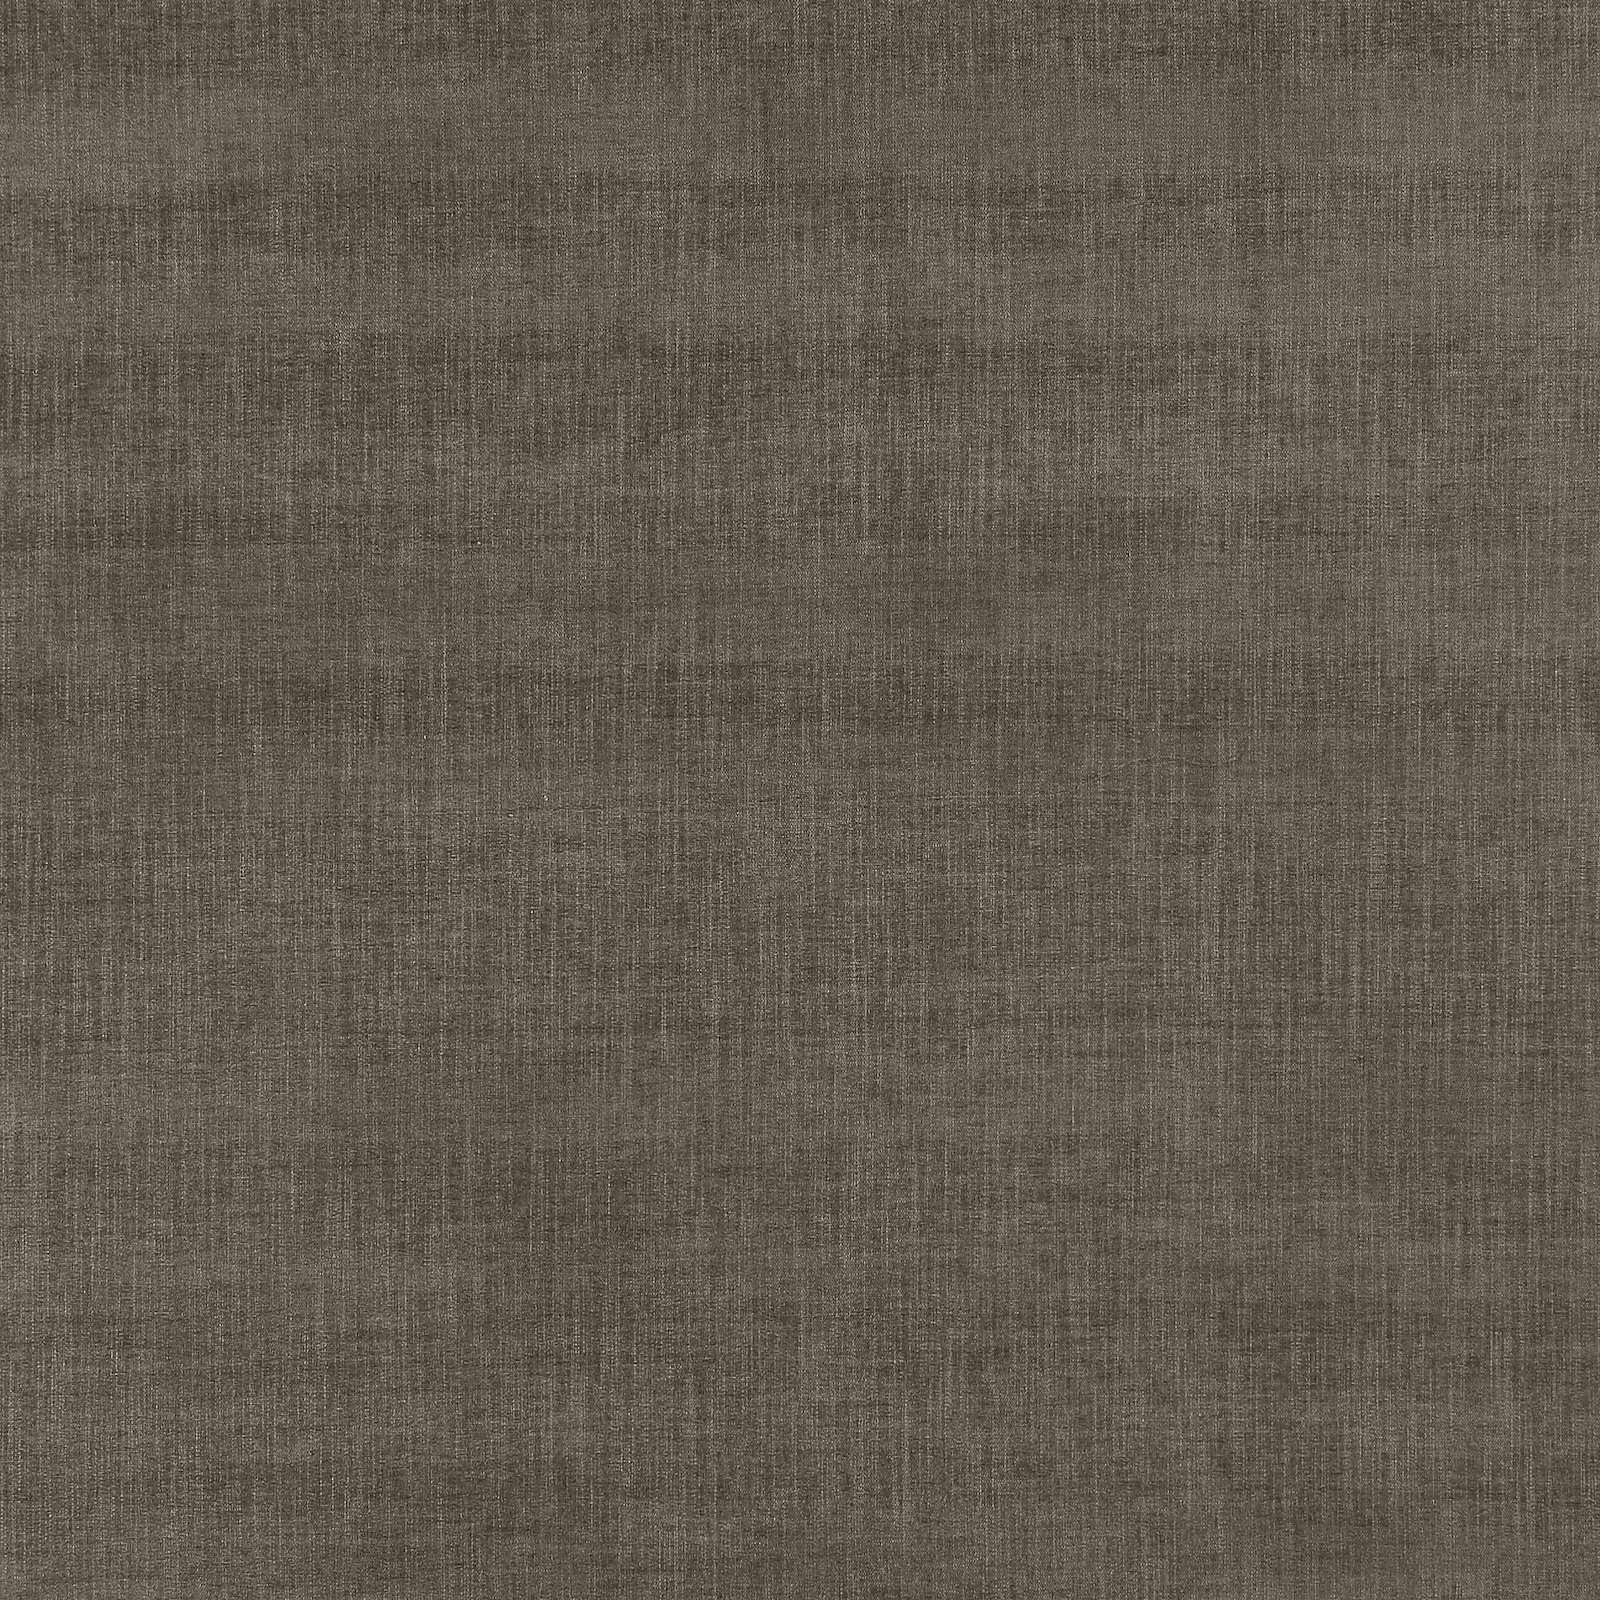 Upholstery chenille w structure walnut 824179_pack_solid